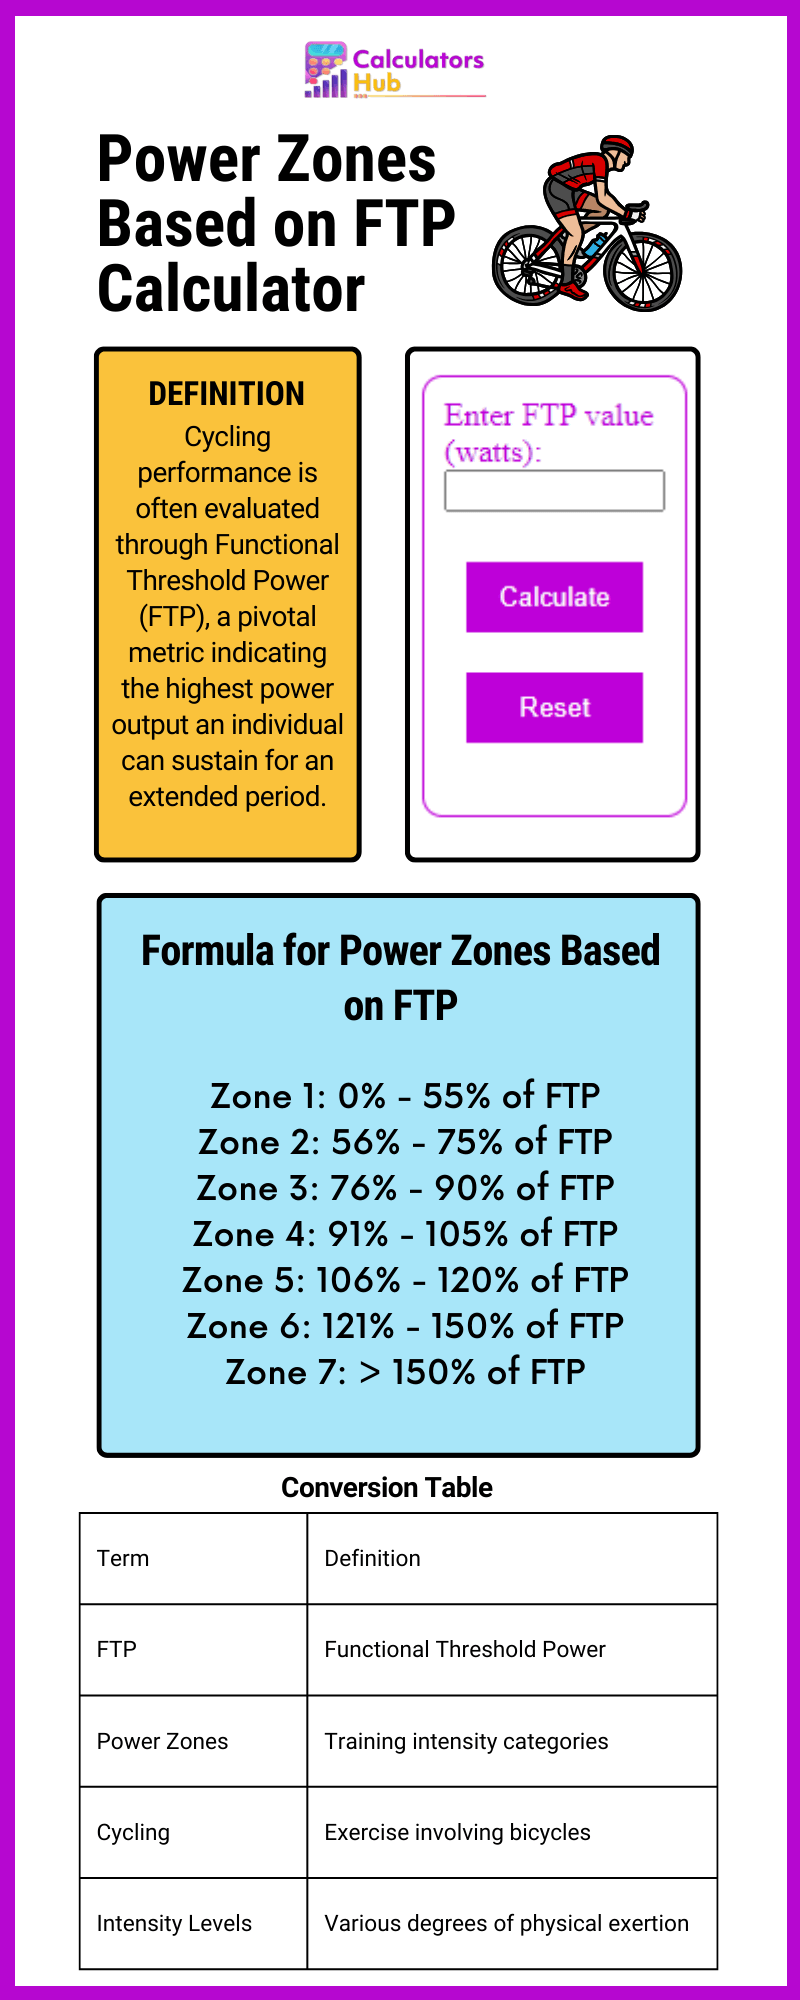 Power Zones Based on FTP Calculator